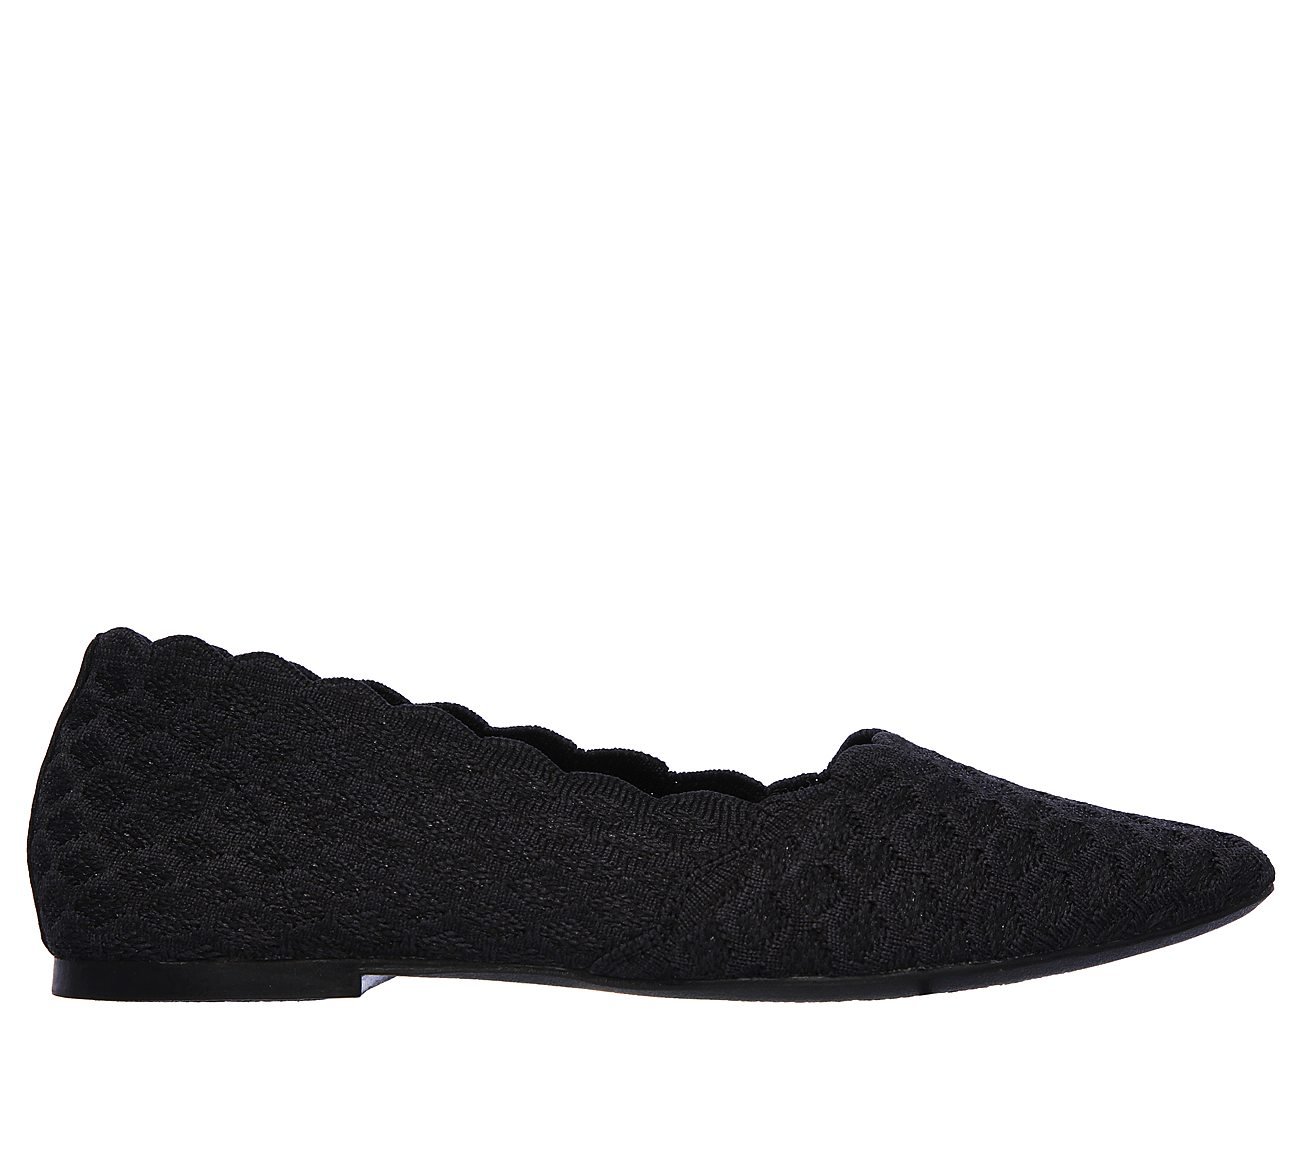 CLEO - HONEYCOMB, BBBBLACK Footwear Lateral View